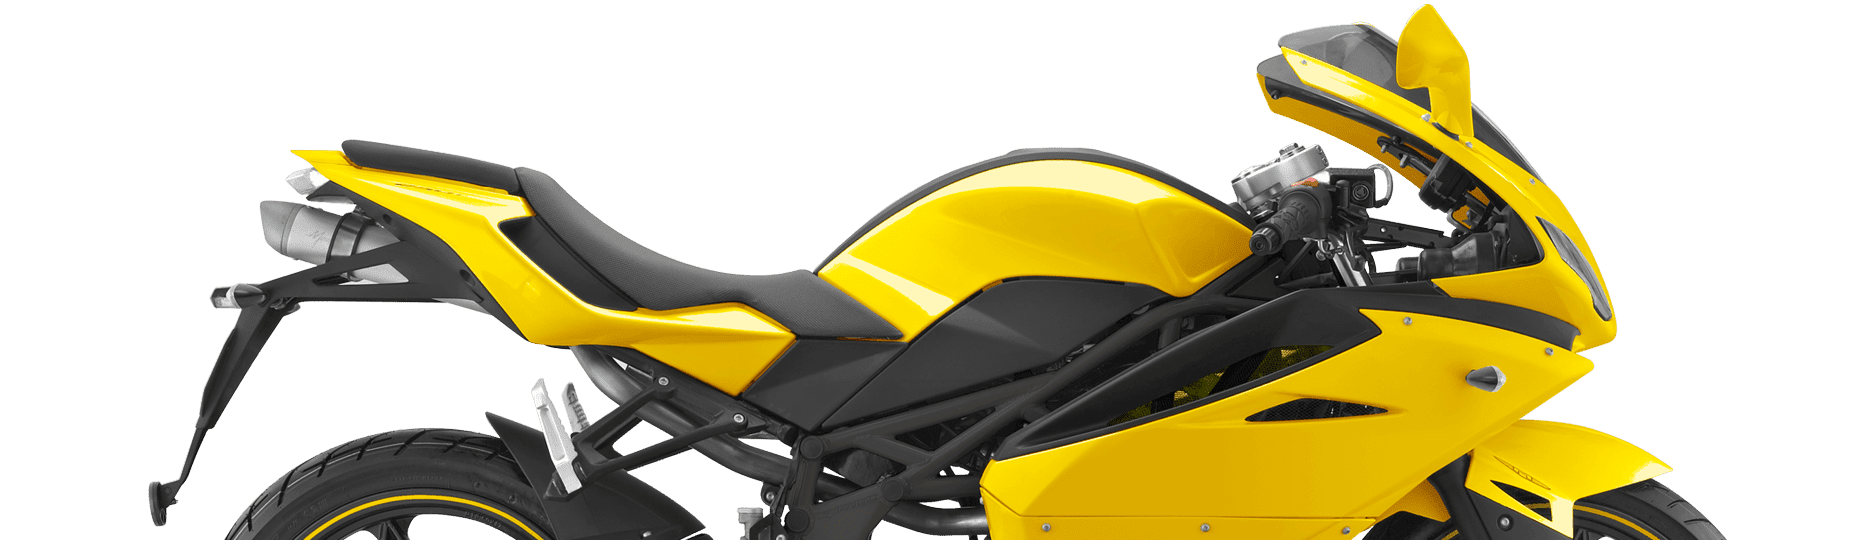 motorcycle styling design